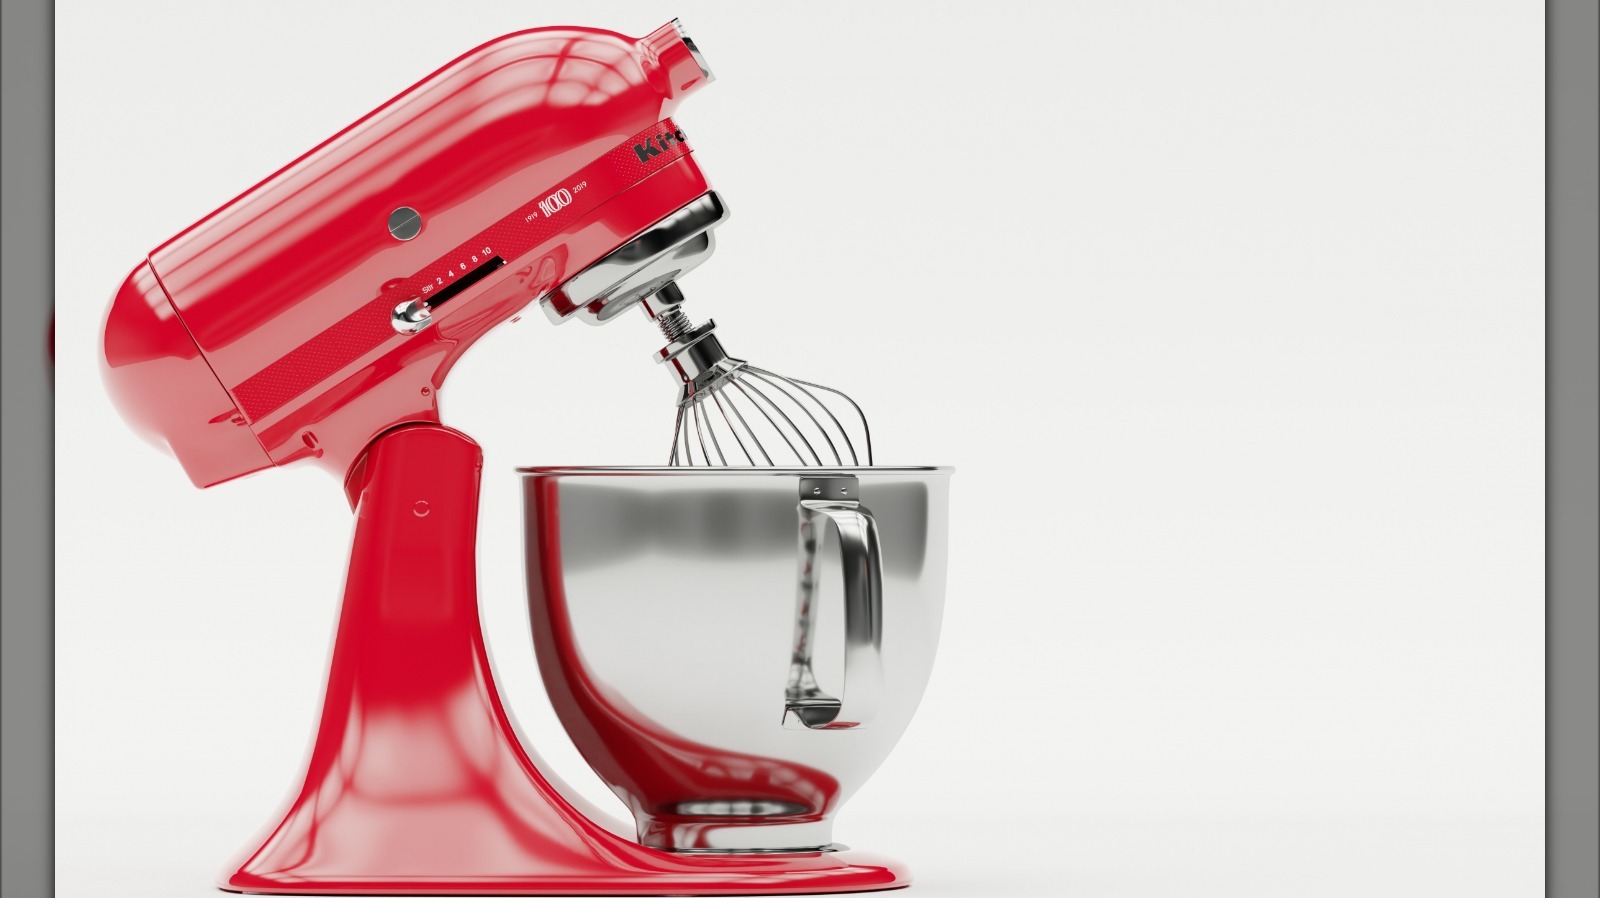 https://www.mashed.com/img/gallery/is-repairing-your-kitchenaid-mixer-worth-the-cost/l-intro-1682267189.jpg